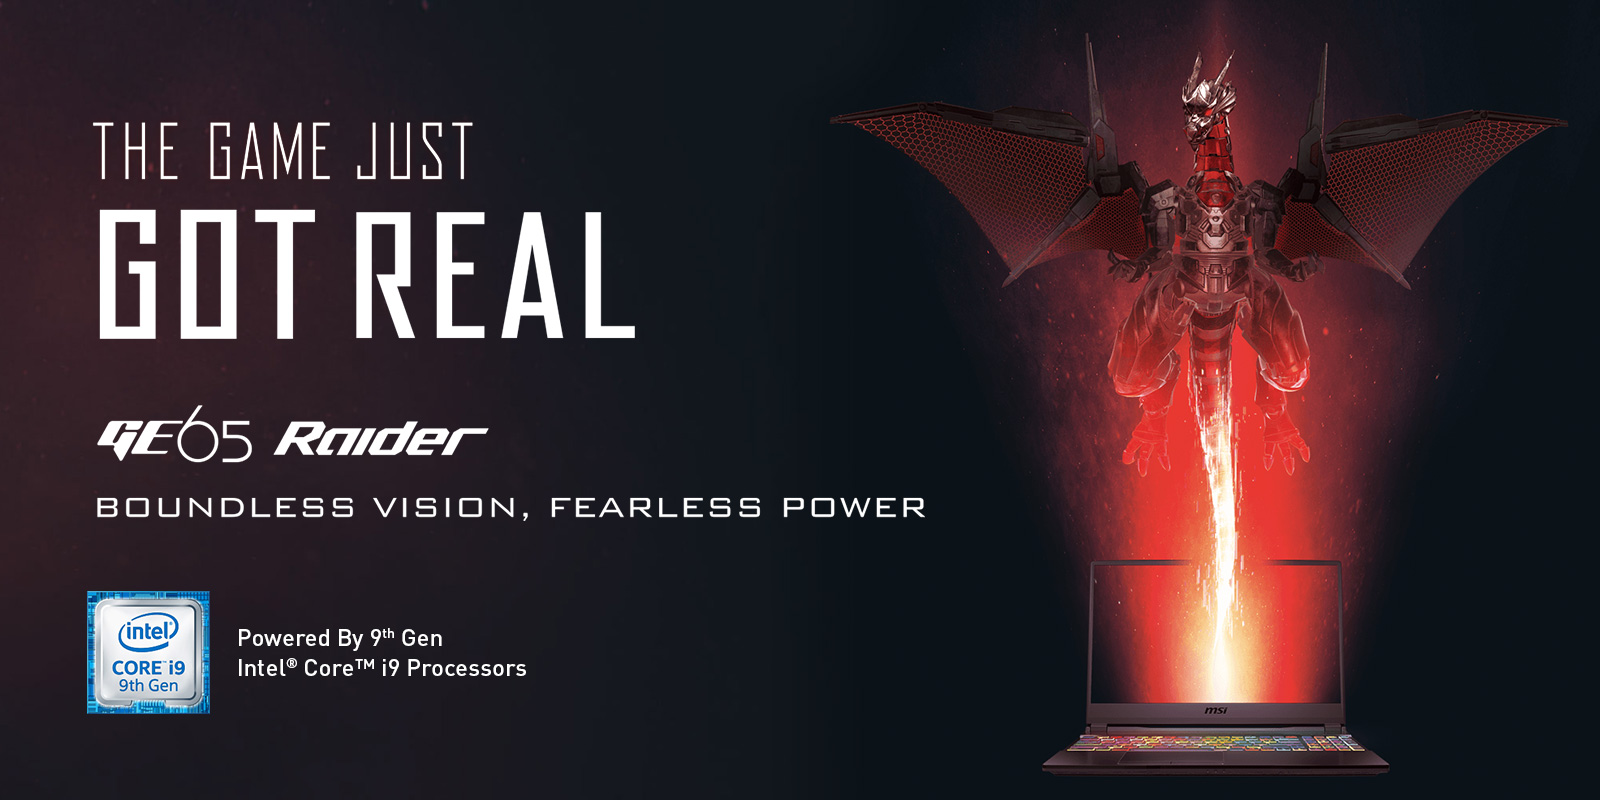 Gigabyte GE63 Raid Gaming Laptop Banner showing a Mechanical Red Gloawing Dragon Rising from the open laptop screen, along with text that reads: THE GAME JUST GOT REAL - GE65 RAIDER - Boundless Vision, Fearless Power, along with the Intel Core i9 9th Gen badge and text that reads: Powered by 9th Gen Intel Core i9 Processors